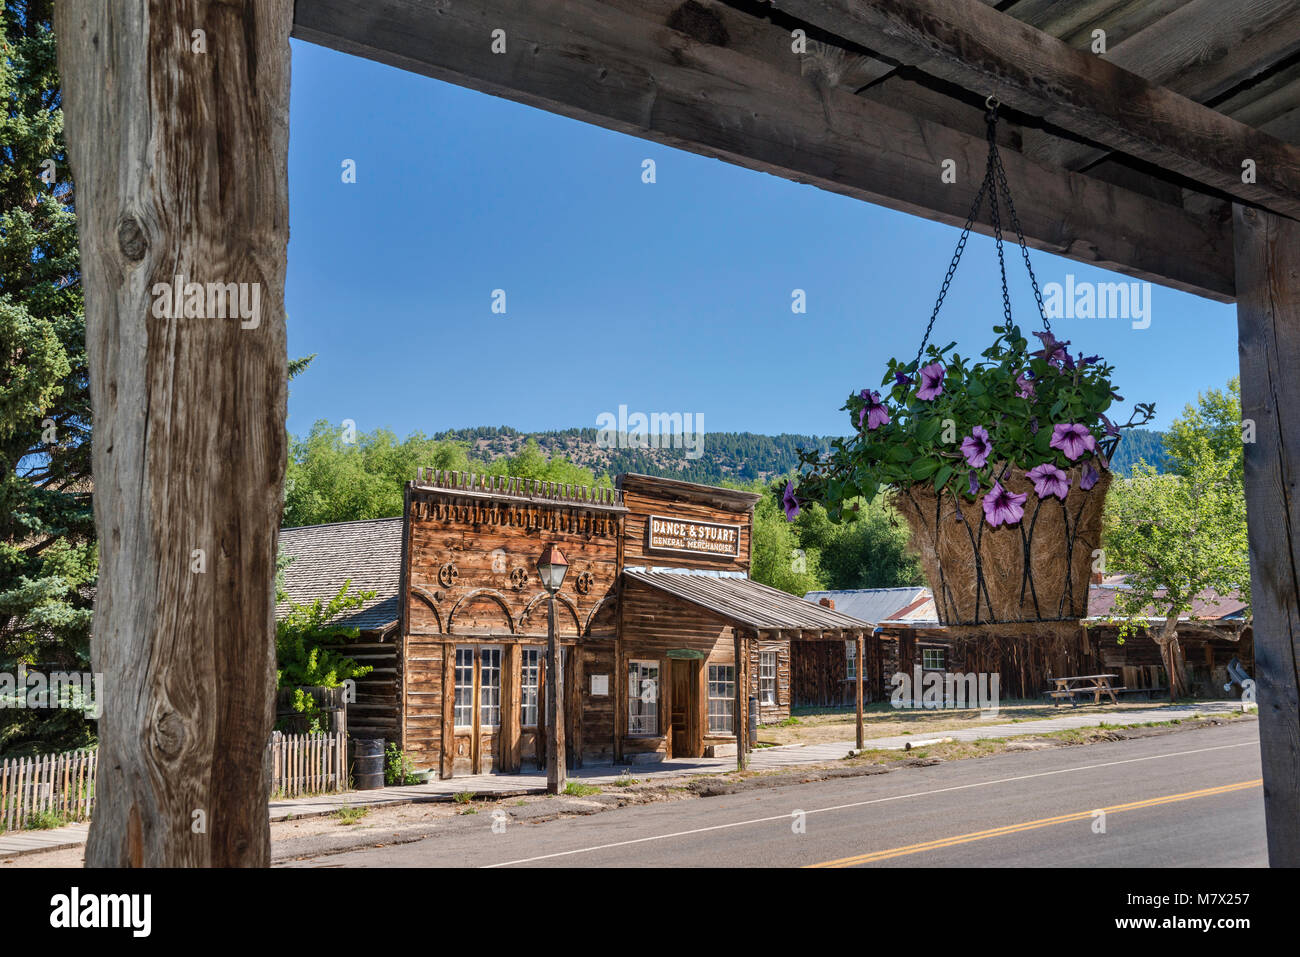 Dance and Stuart Store (1862) in ghost town of Virginia City, Montana, USA Stock Photo